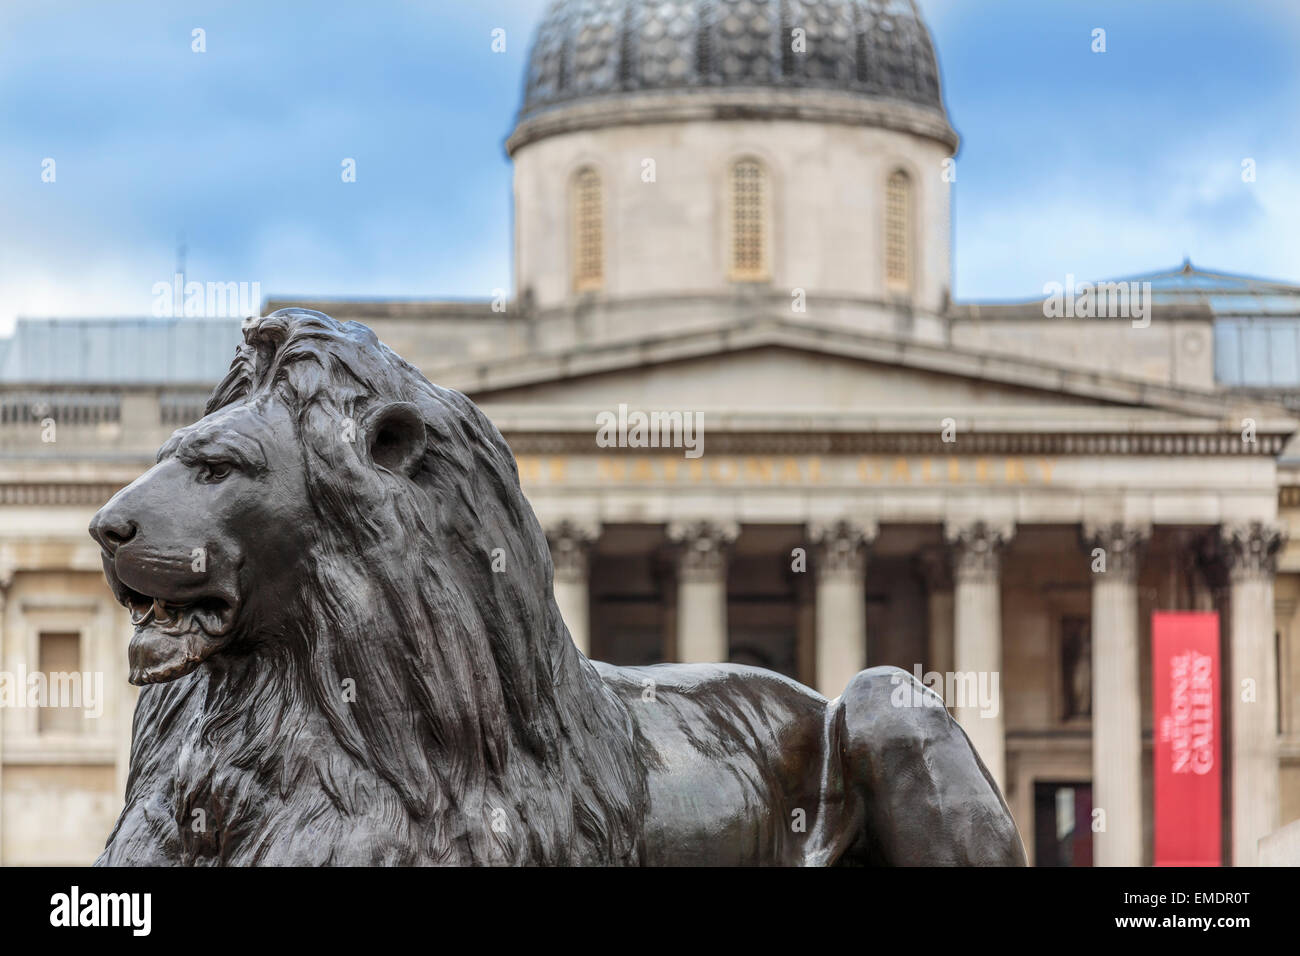 The Trafalgar Square Lions with the National gallery in the background Stock Photo